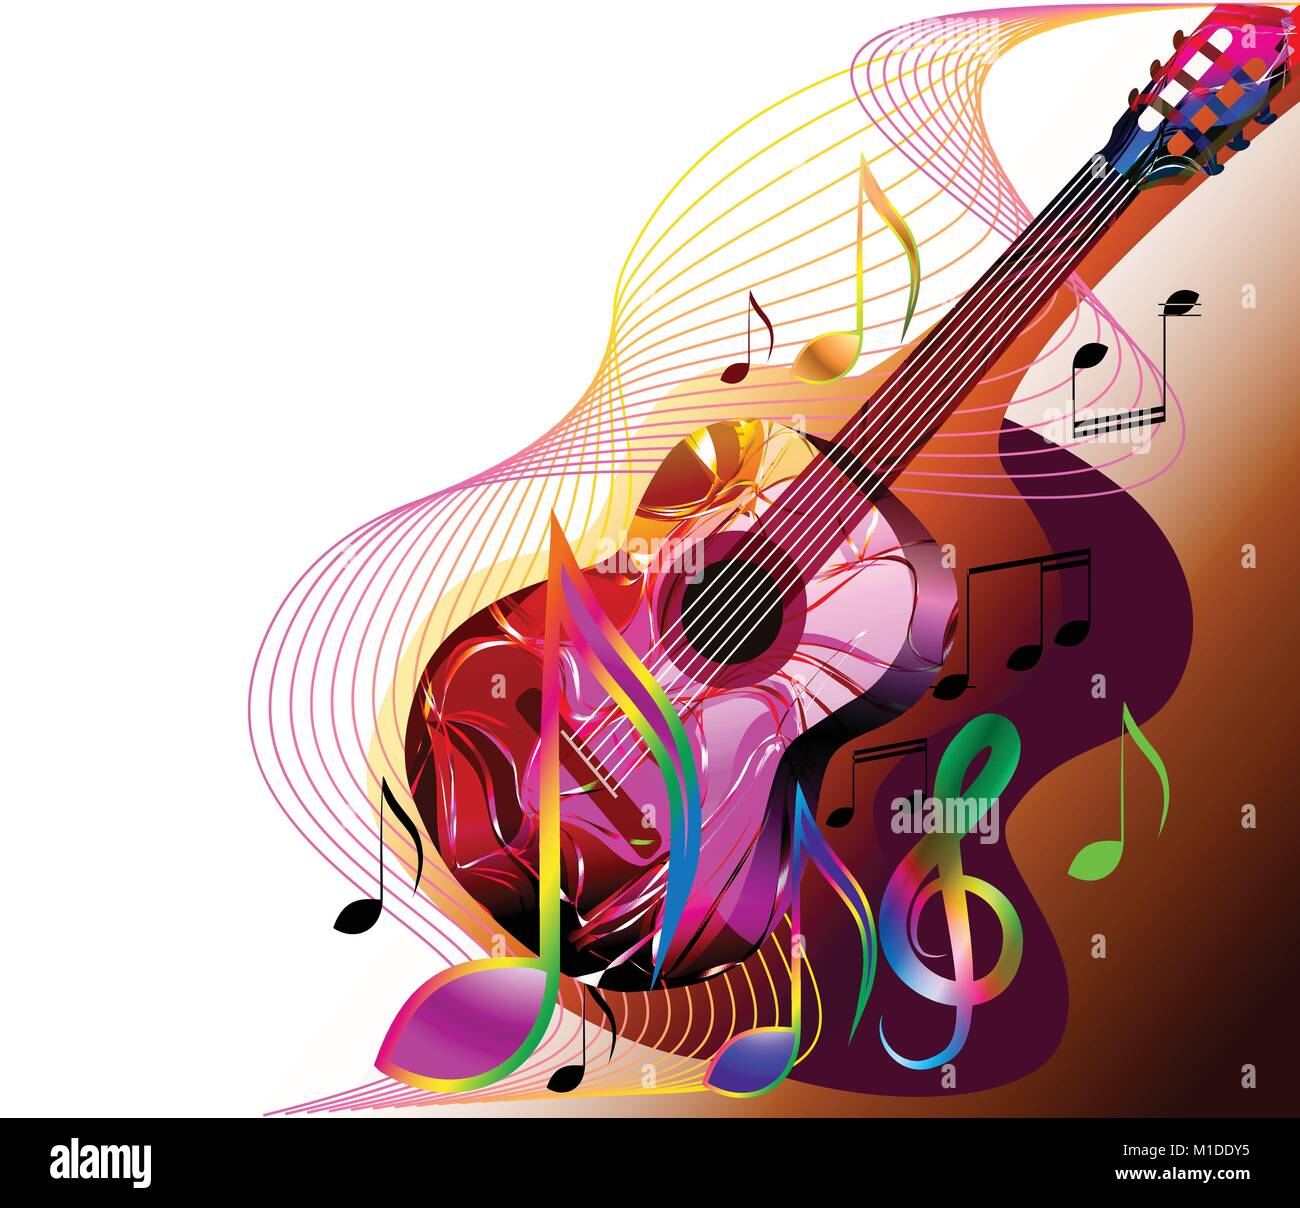 Colourful music background with guitar and music notes Stock ...